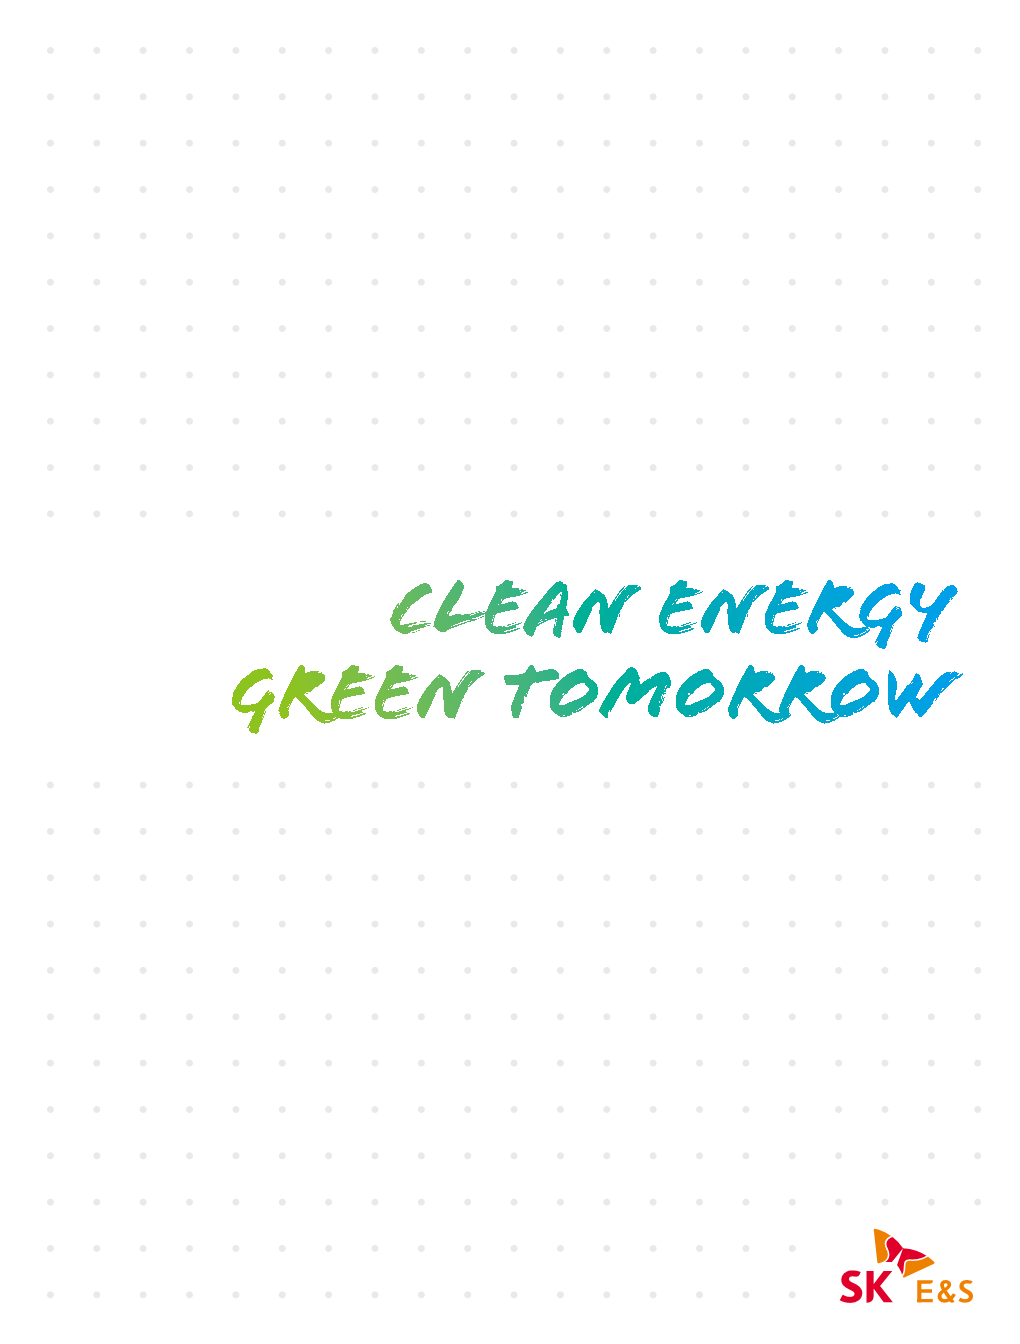 CLEAN ENERGY Green Tomorrow We Are Committed to Sharing Happiness with People and Society